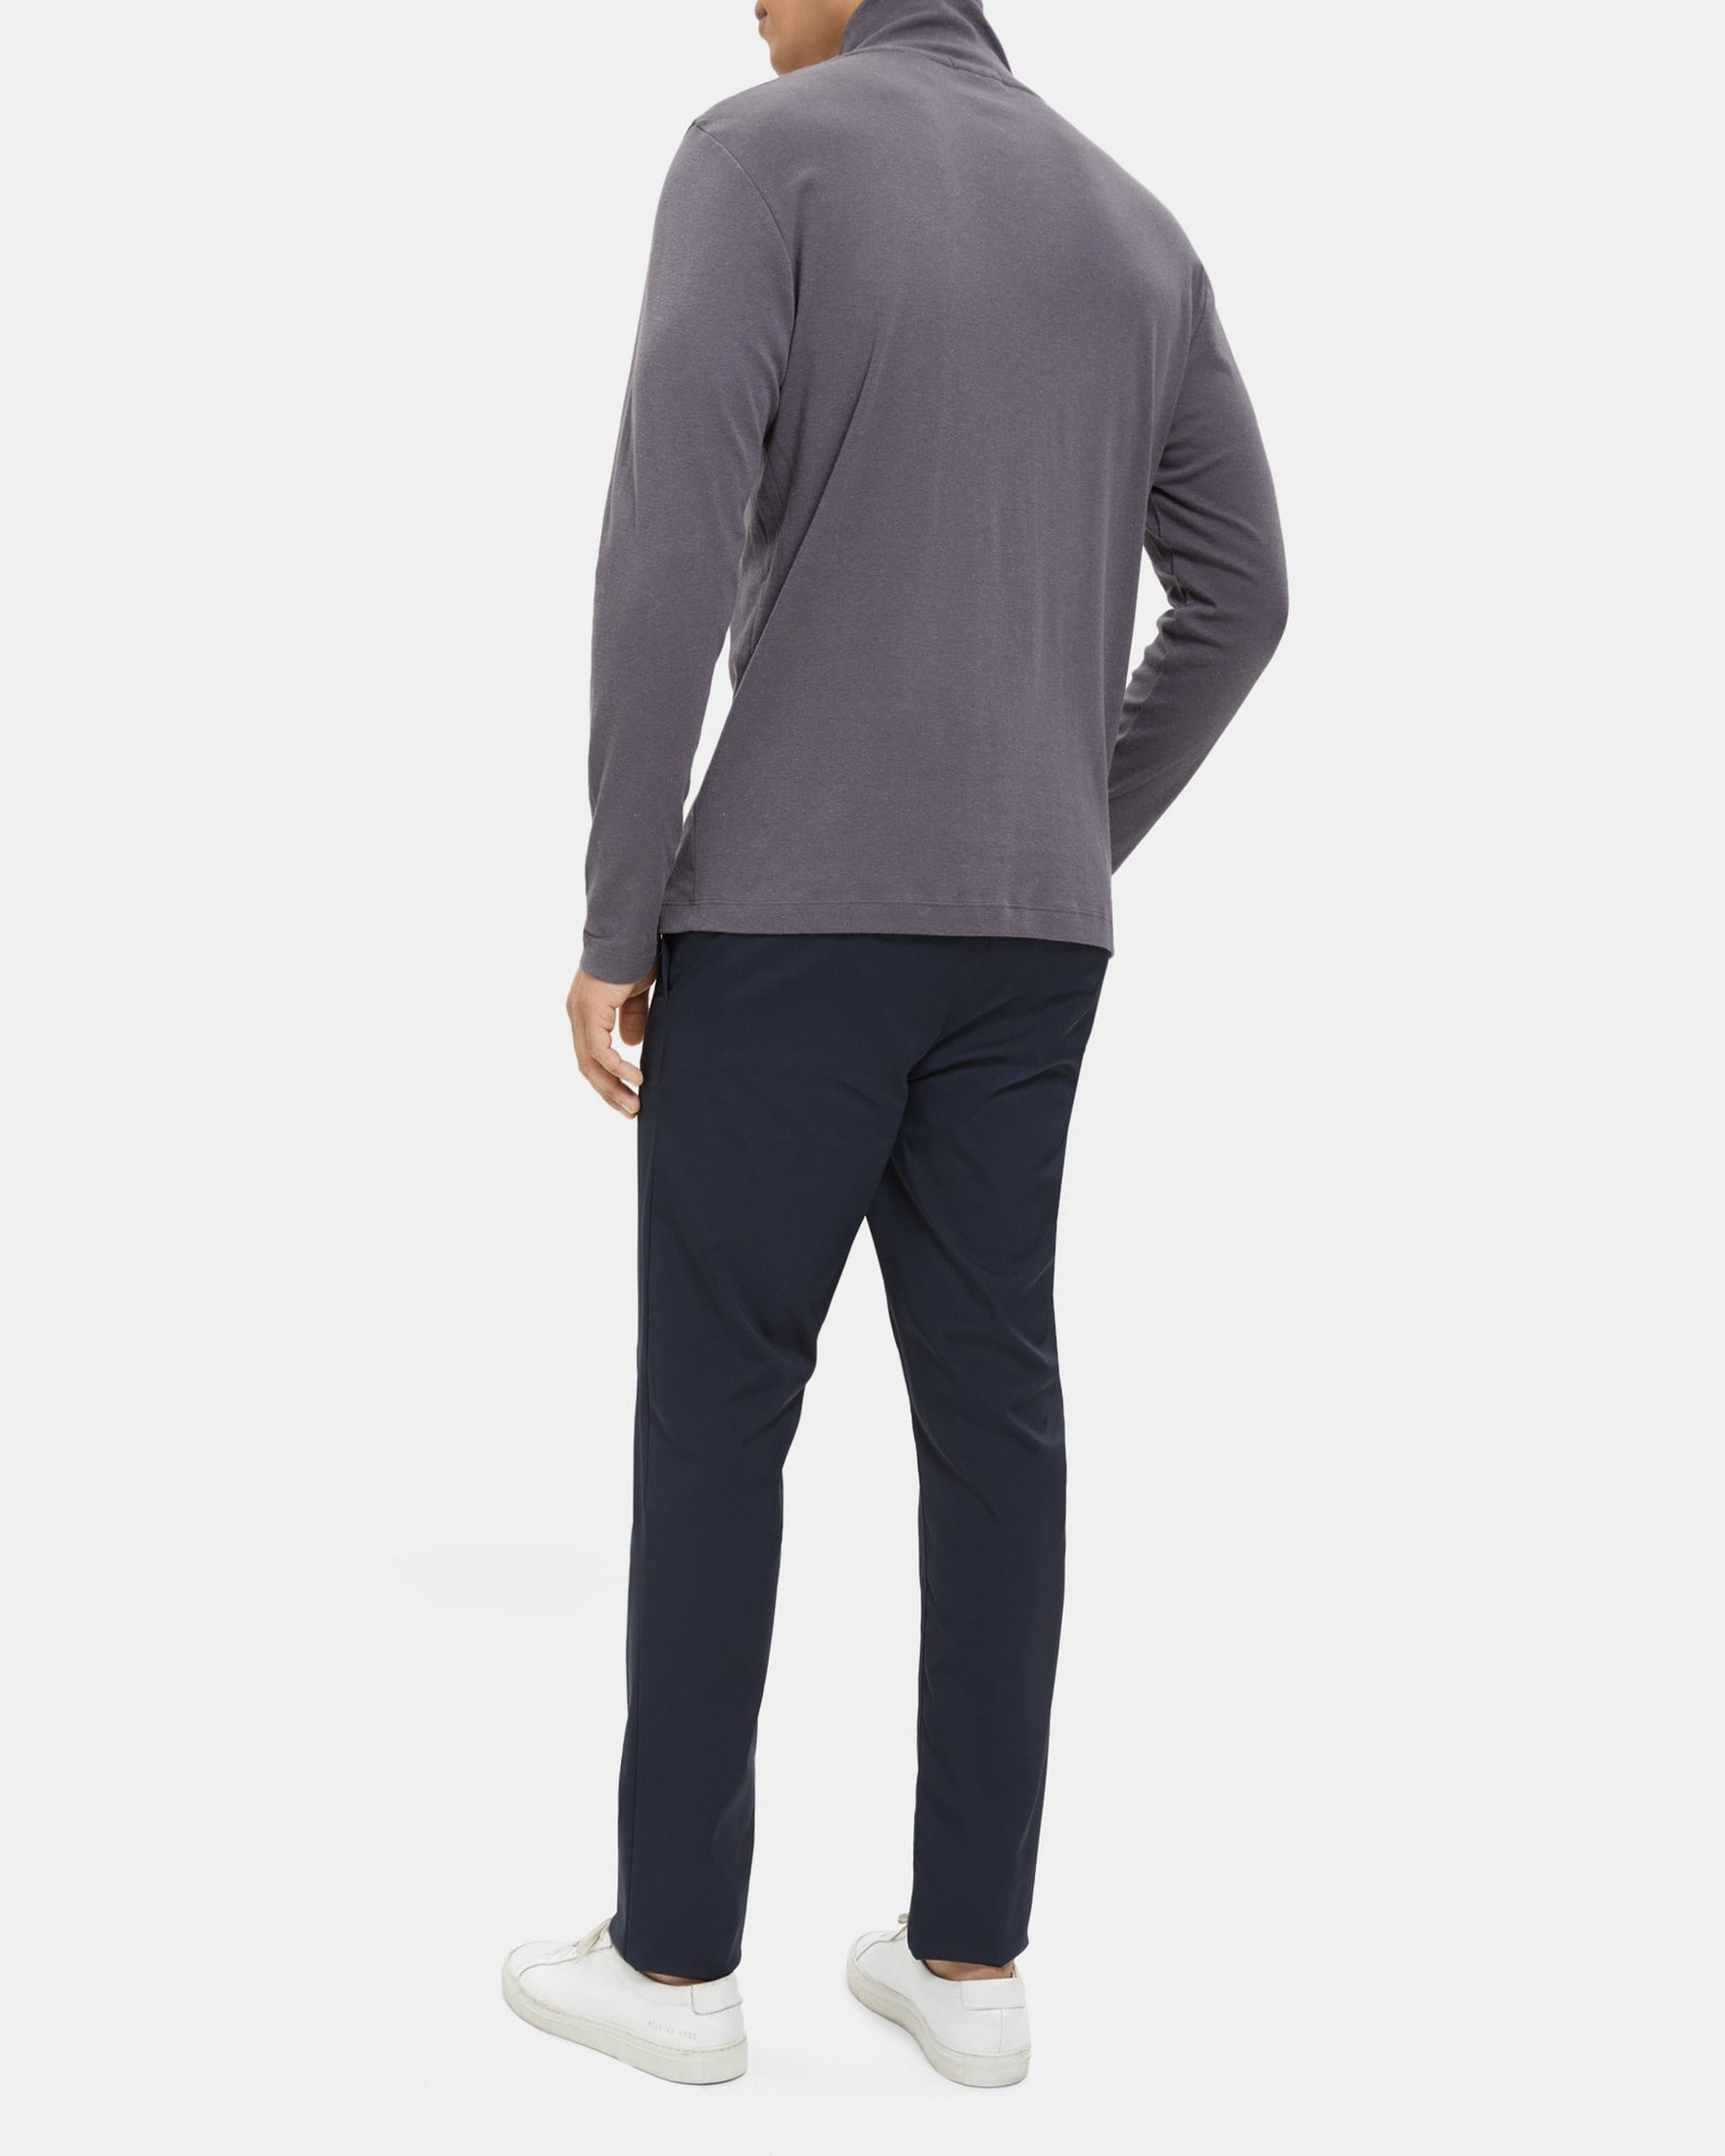 Turtleneck Long-Sleeve Tee in Ribbed Pima Cotton